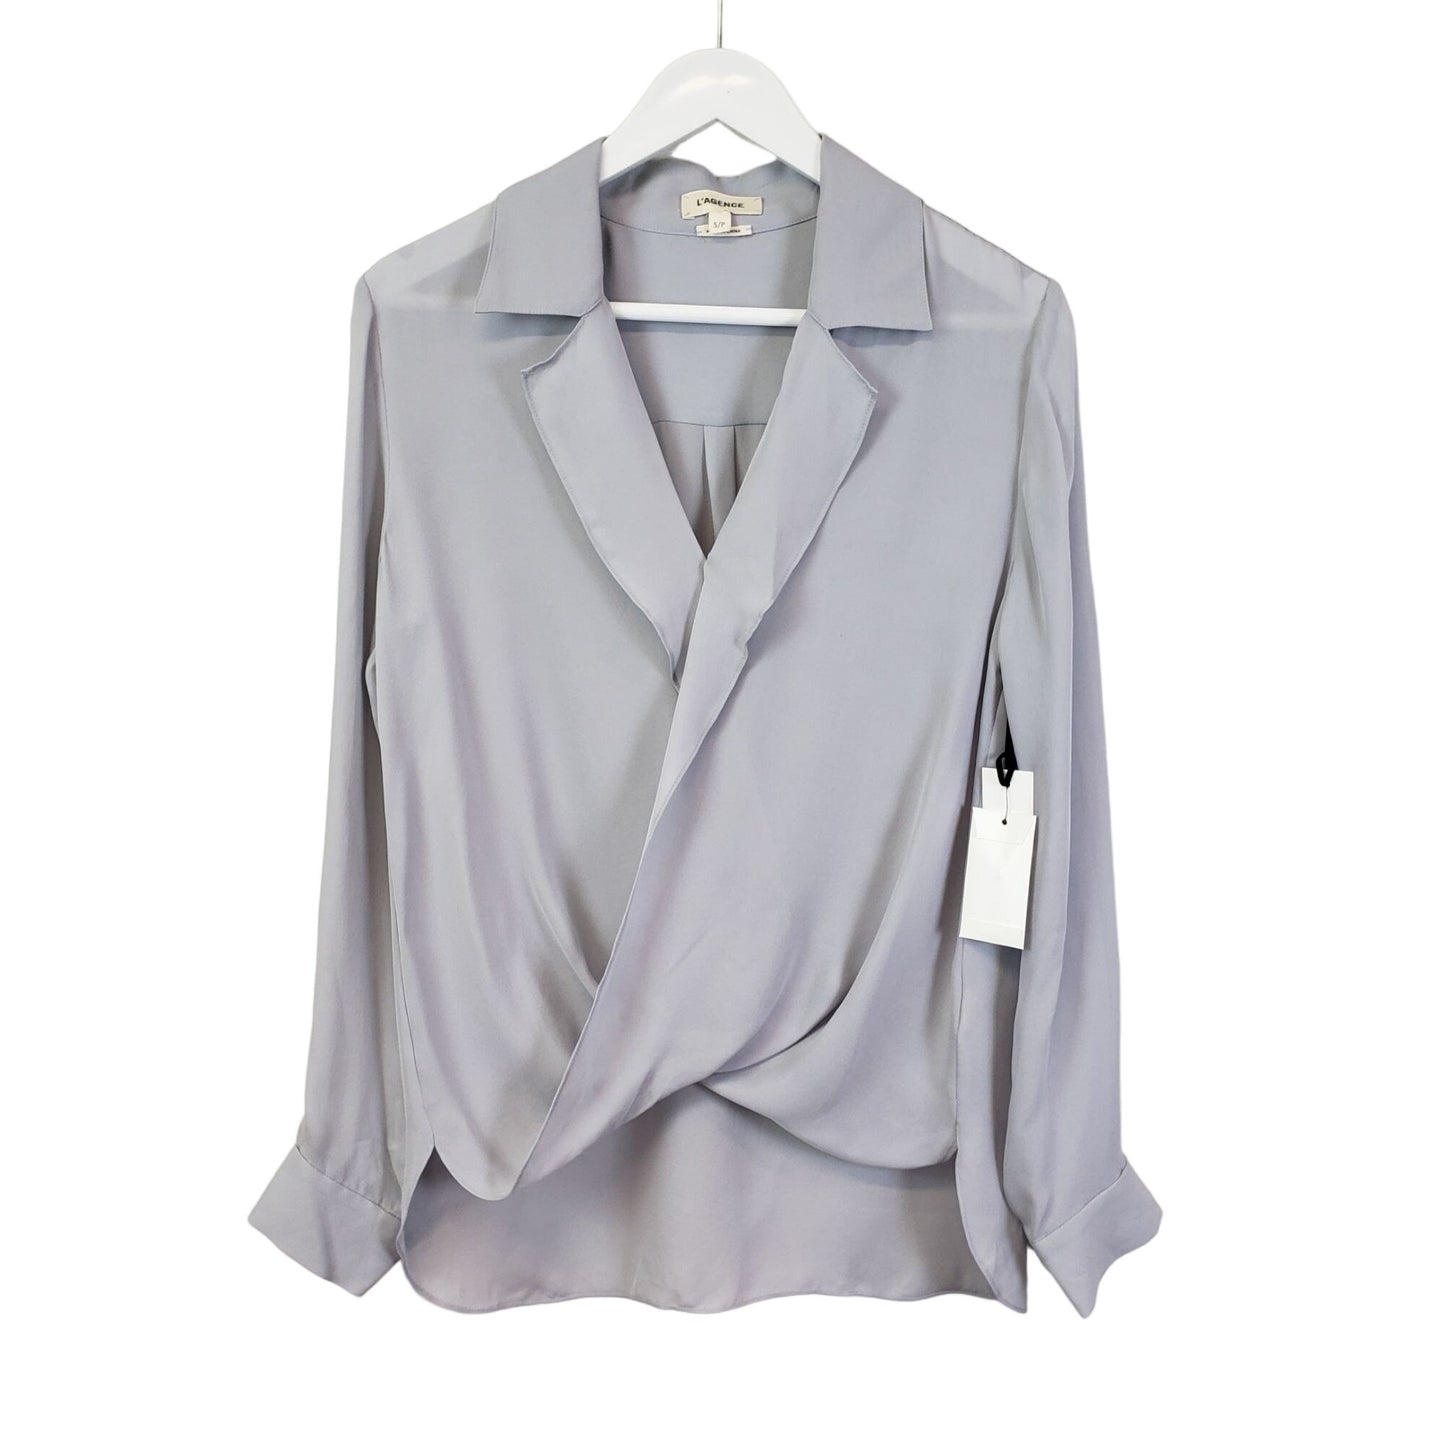 NWT L'Agence Silk Wrap Blouse Size Small